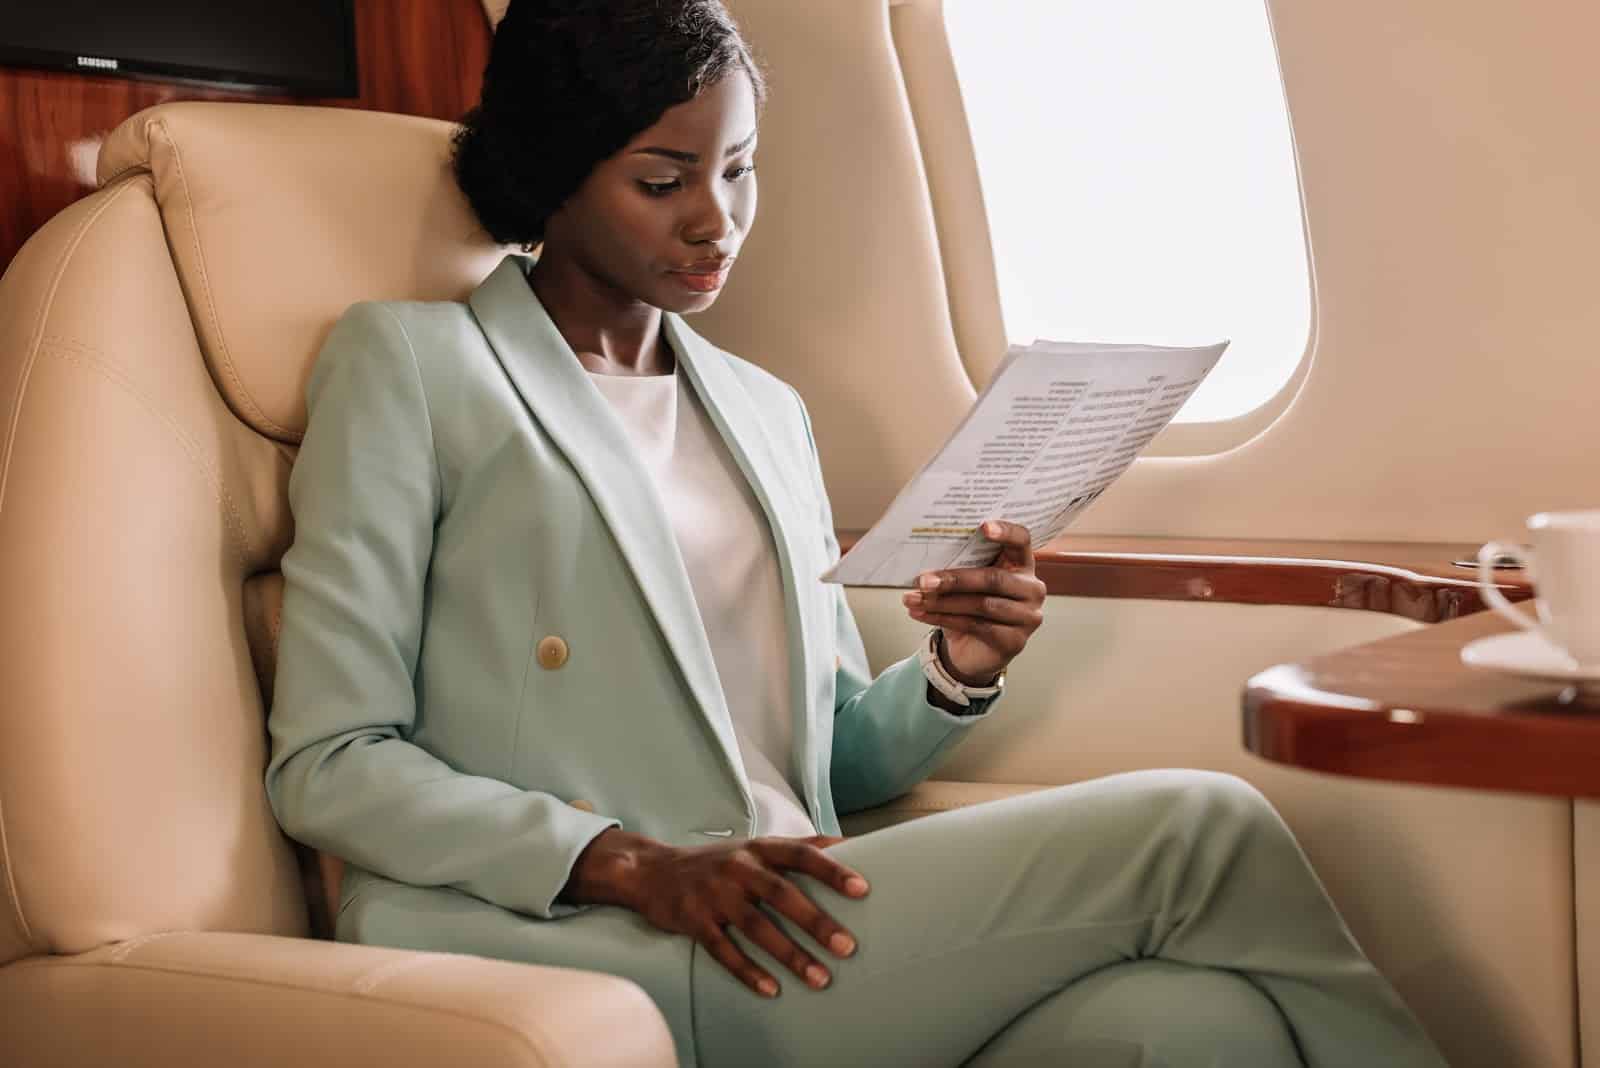 A woman looks at a menu on a private plane